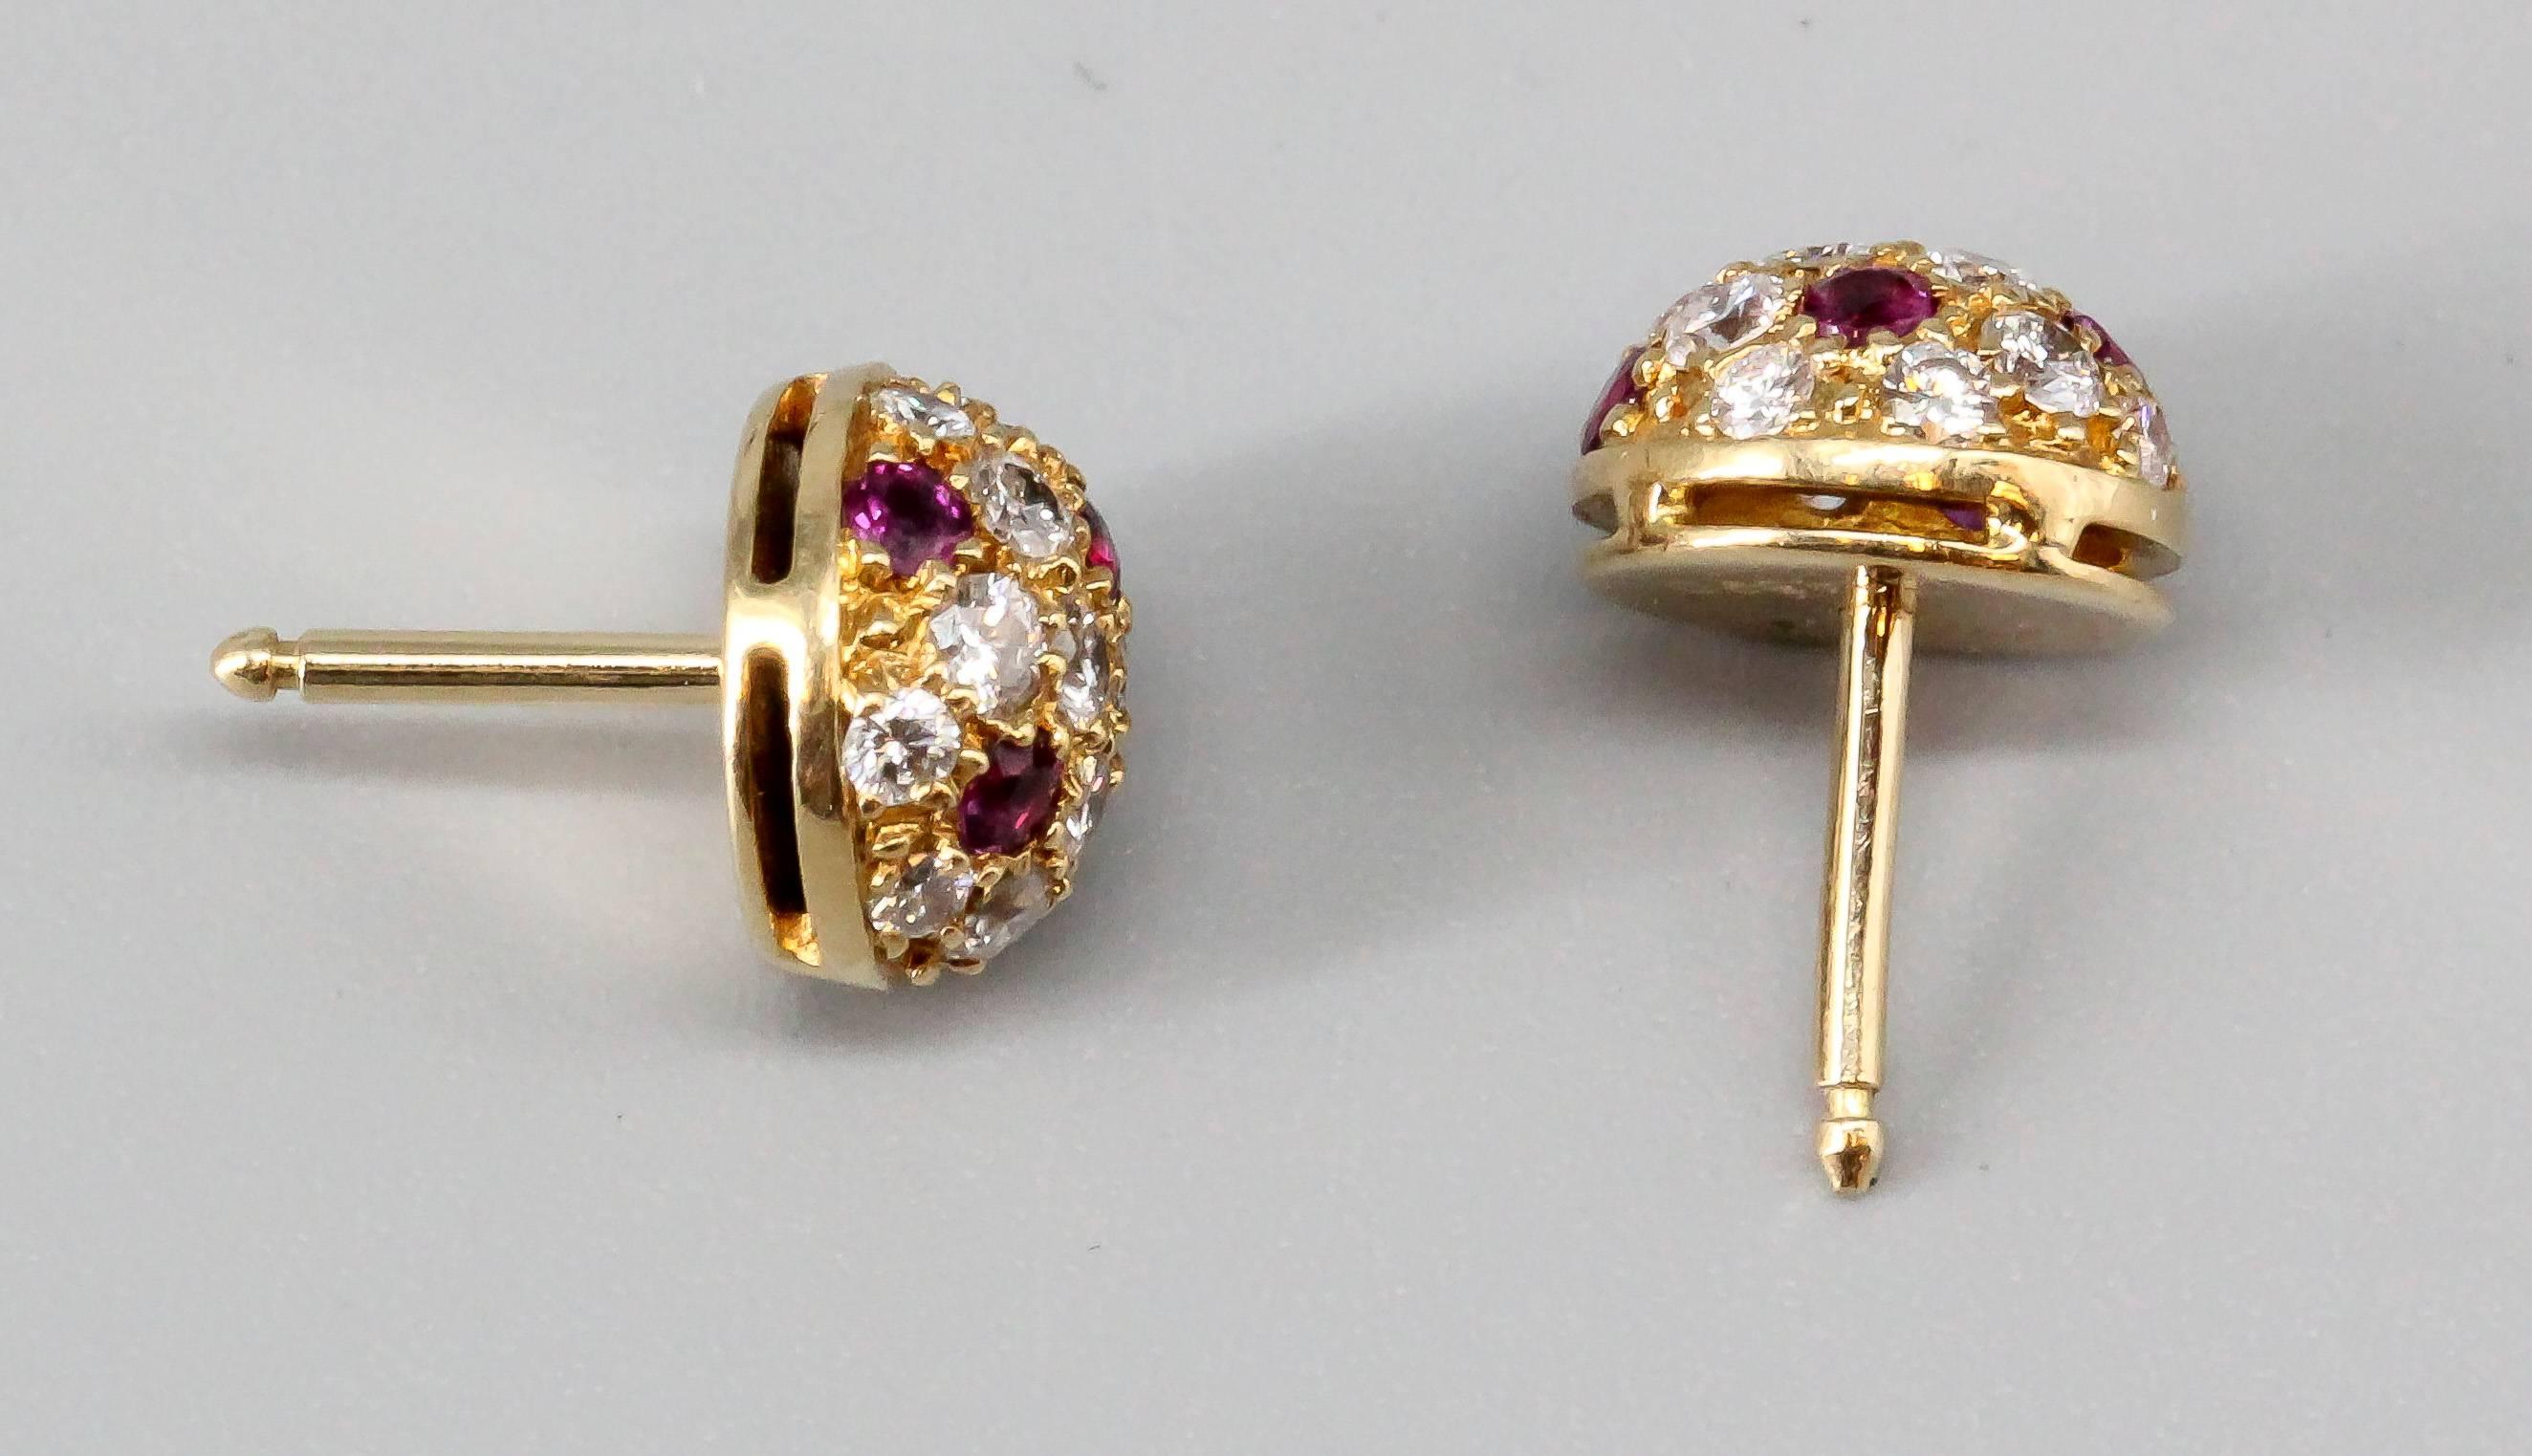 Elegant ruby, diamond and 18K yellow gold stud earrings by Cartier. They feature rich red rubies, along with high grade round brilliant cut diamonds on an 18K yellow gold setting. Impeccable workmanship and easy to wear.

Hallmarks: Cartier, 750,